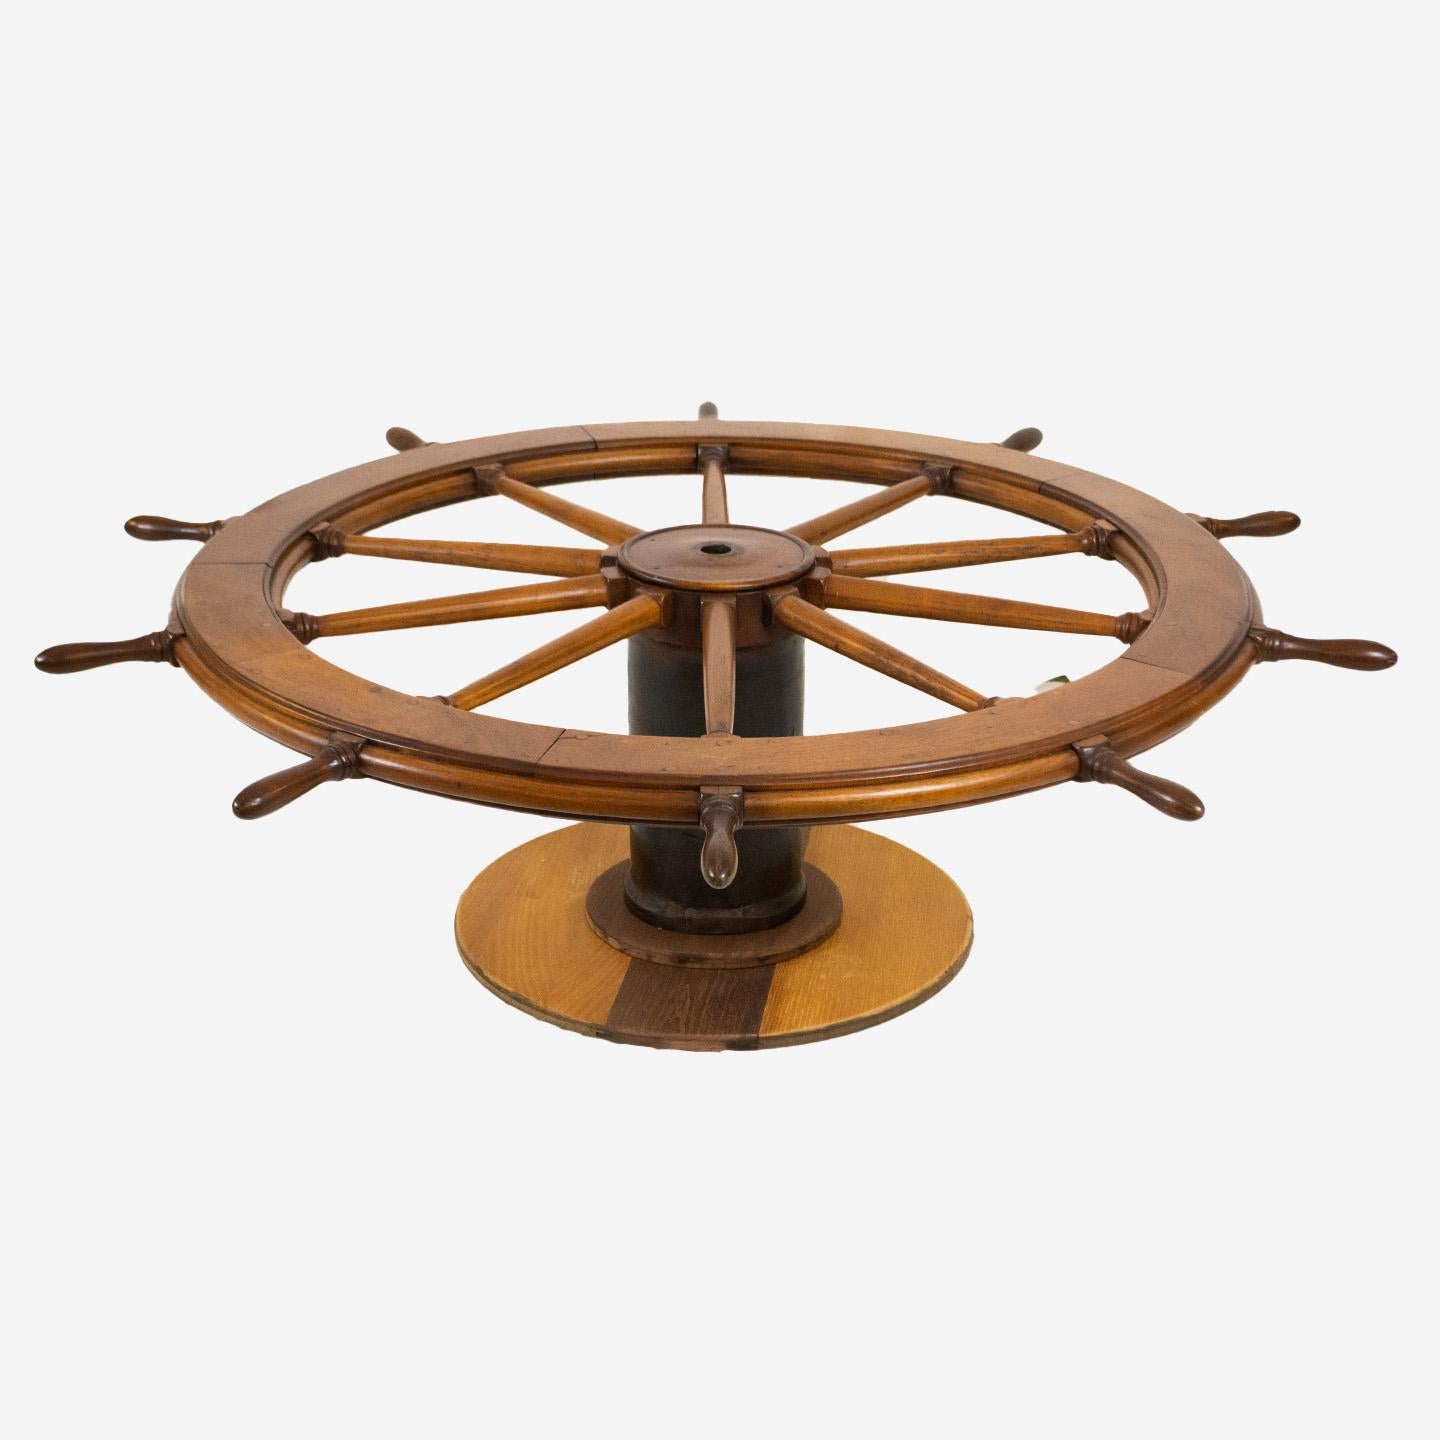 An authentic 65 inch ship's wheel coffee table with ten turned spokes and wooden block base. Nice details, fine joinery and craftsmanship. Crafted in solid mahogany and in very good condition. Circa 1920. Glass top not included.